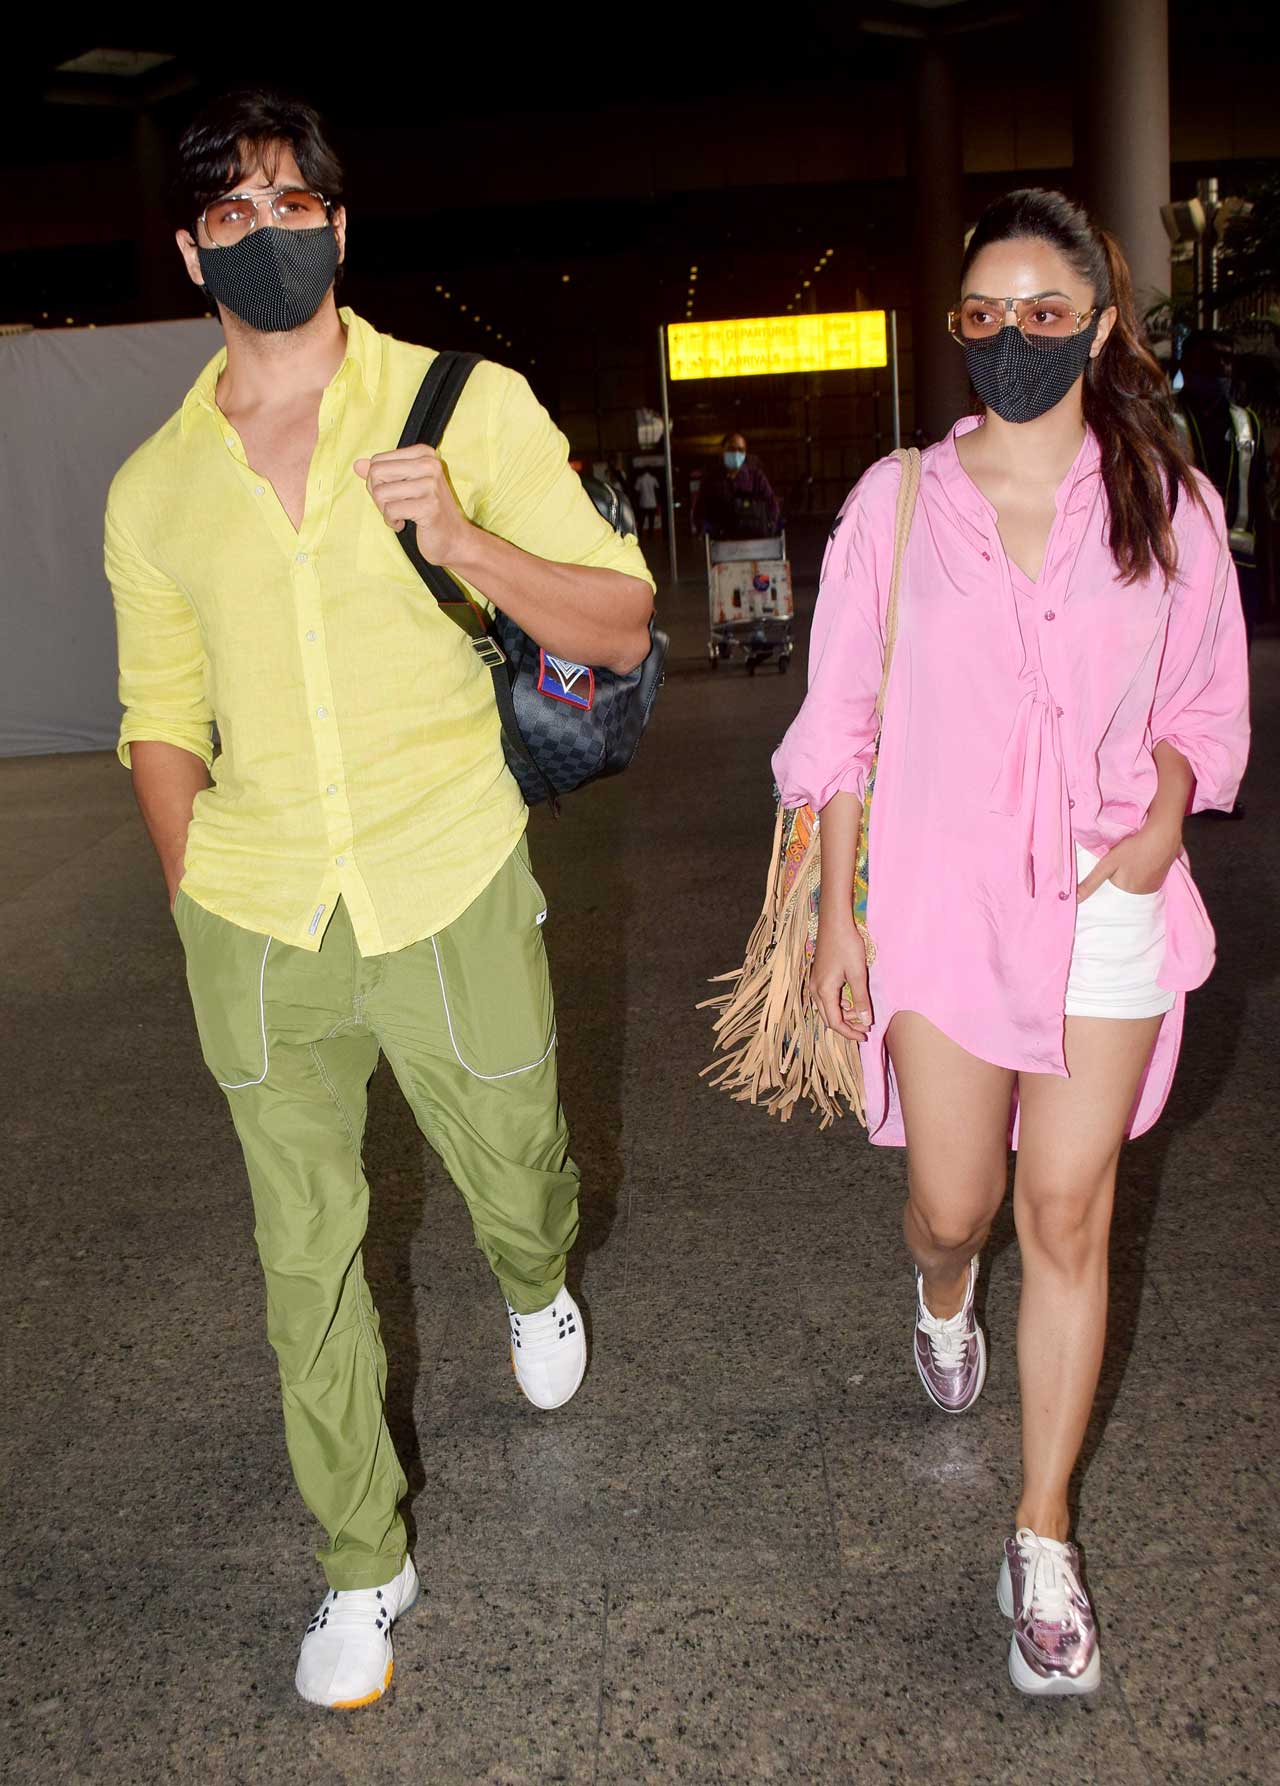 Kiara Advani was seen wearing a pretty pink shirt dress, paired with white shorts. She completed her airport look with pink metallic shoes.